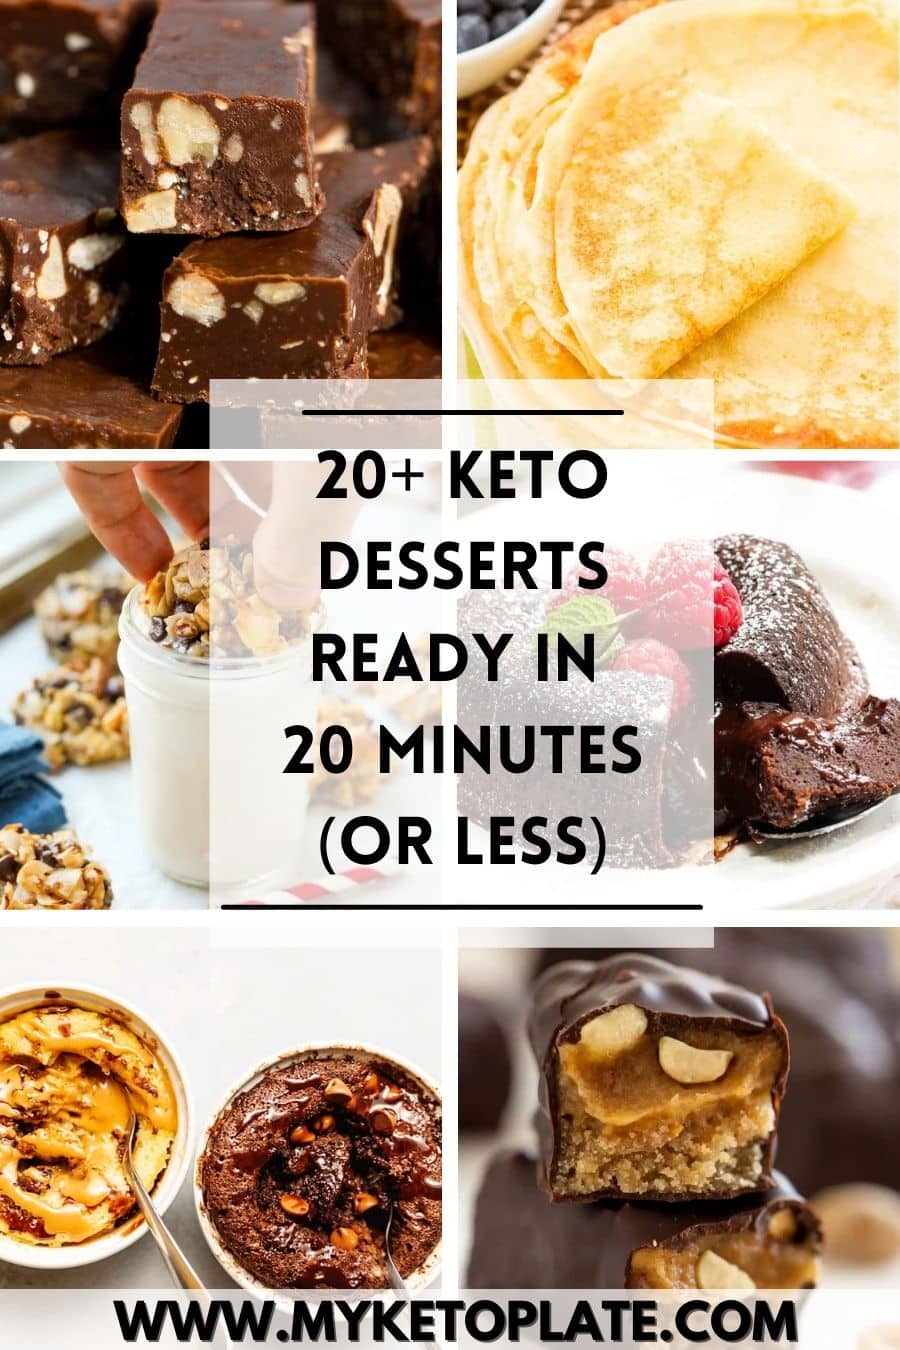 20+ Keto Desserts Ready in 20 Minutes (Or Less)-2